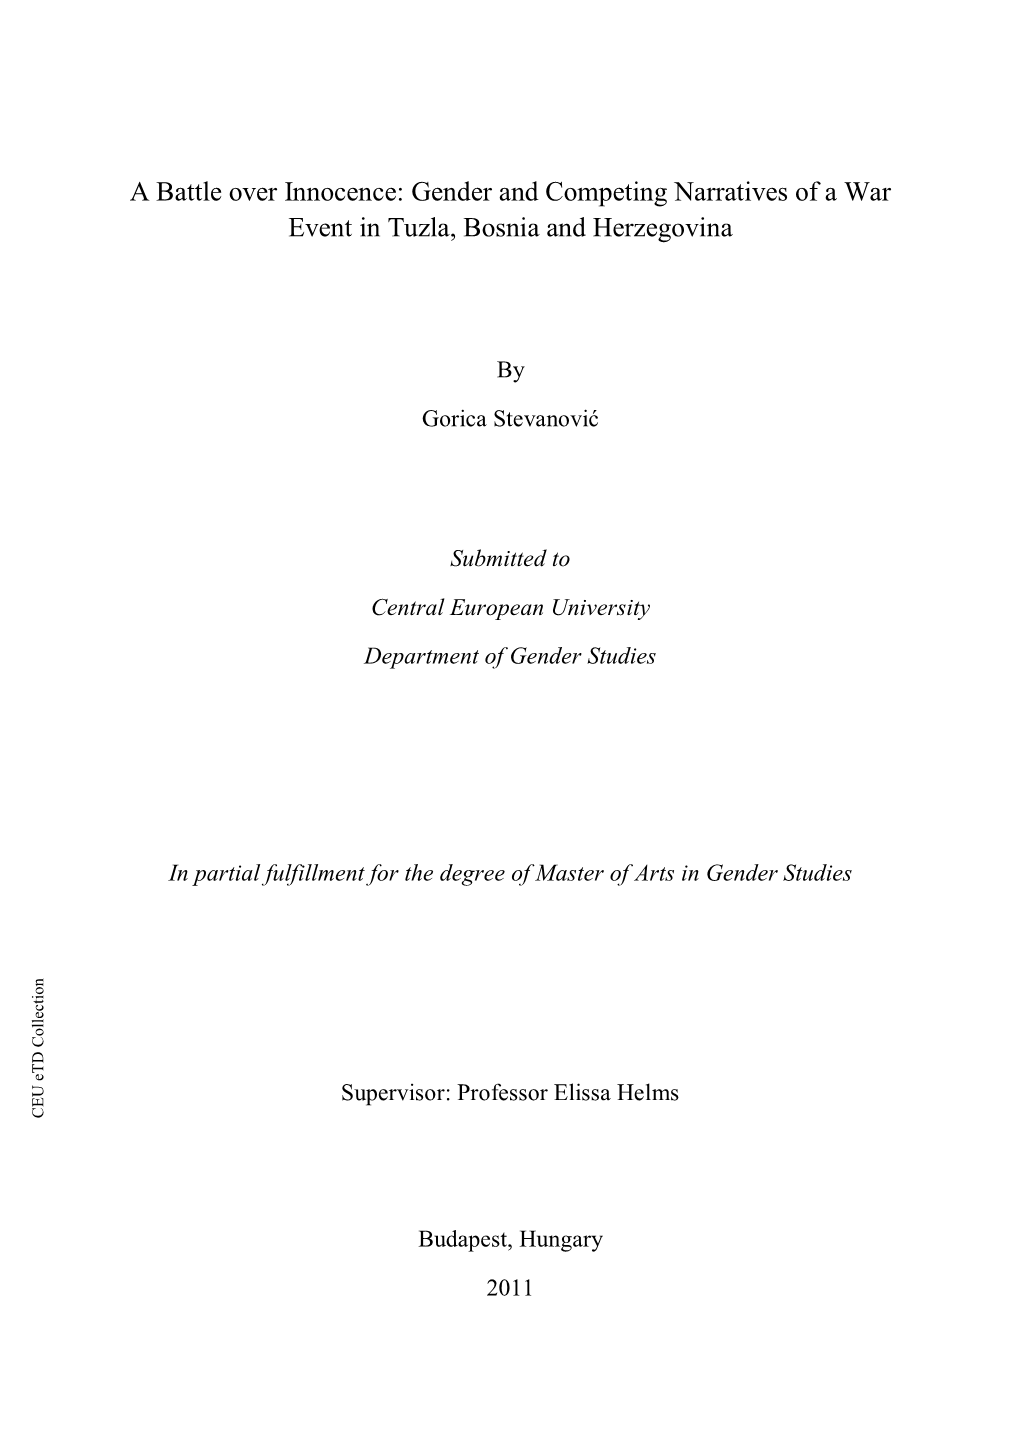 Gender and Competing Narratives of a War Event in Tuzla, Bosnia and Herzegovina